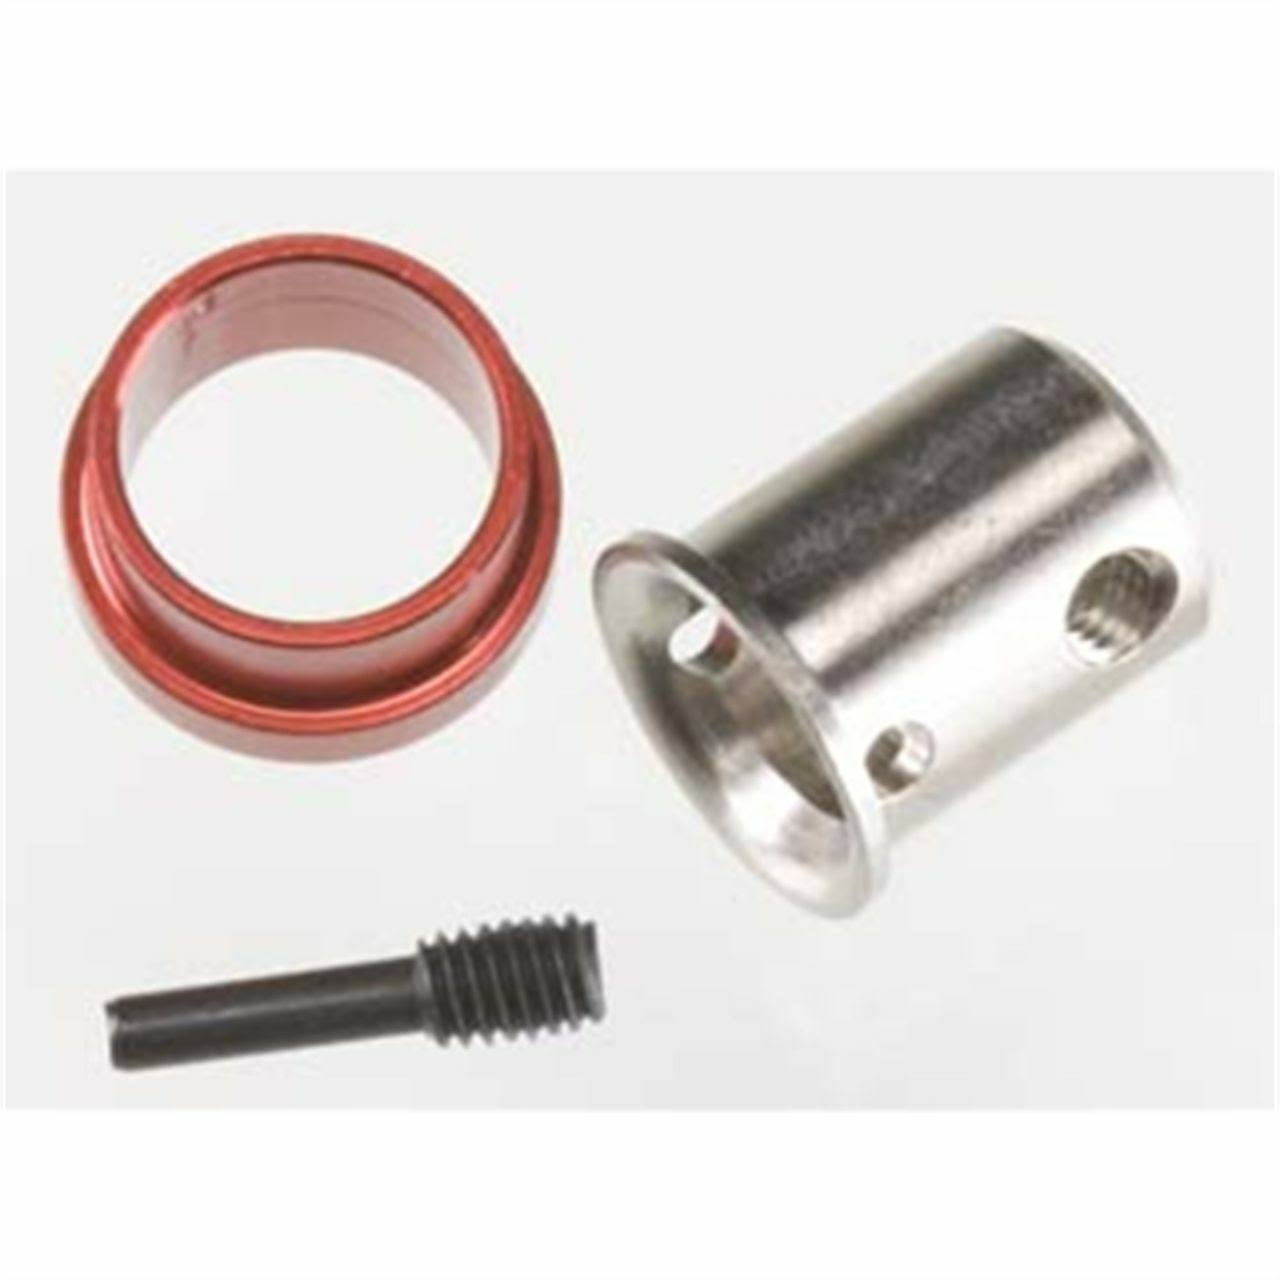 Traxxas 5162 Drive Cup/Screw Pin M4/15